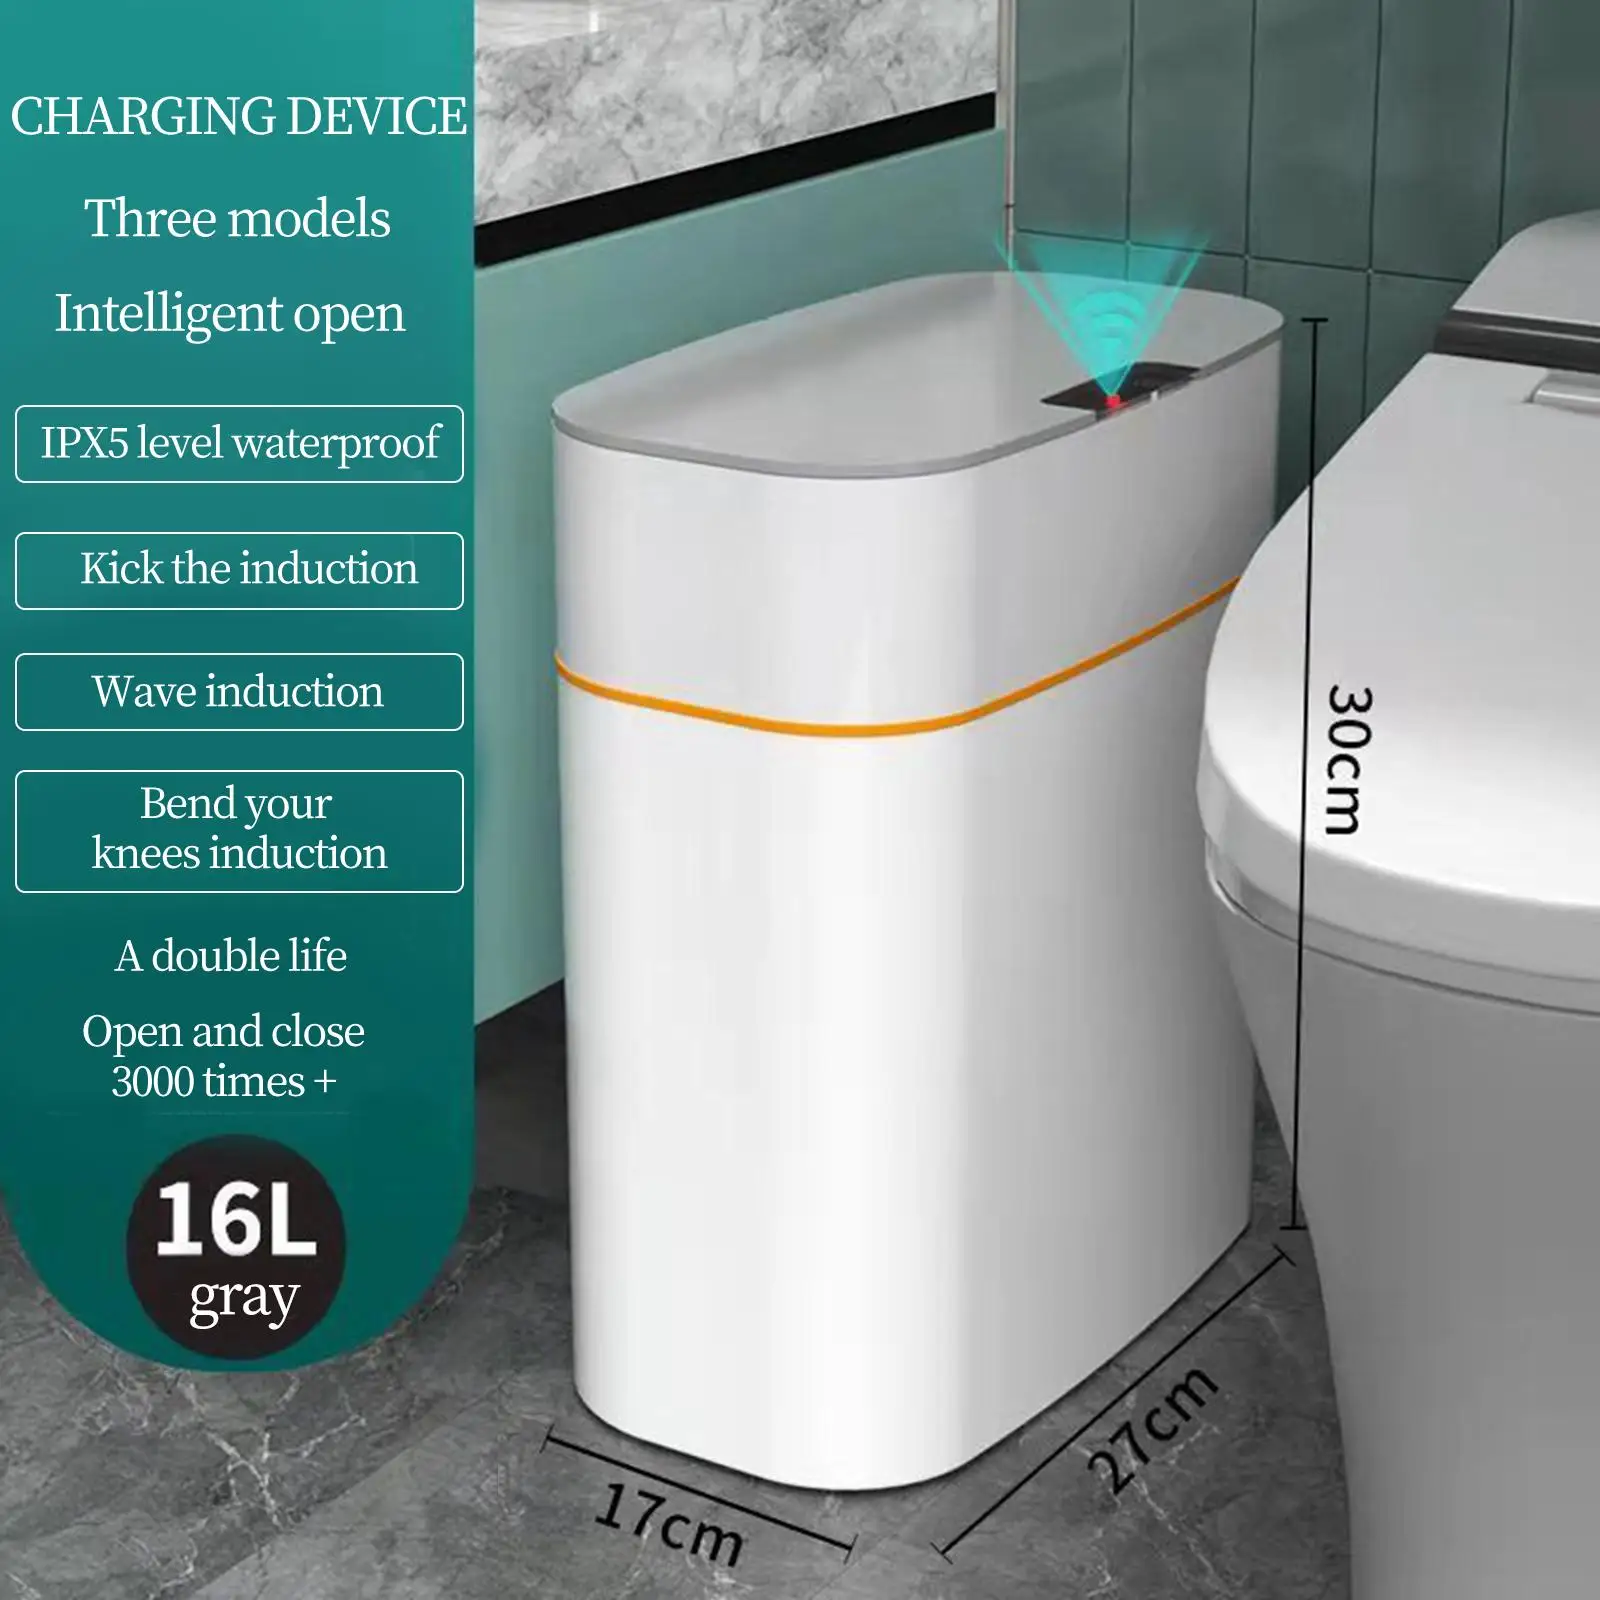 16L Household Dustbin Touchless Automatic Smart Trash Can for Study Bedroom